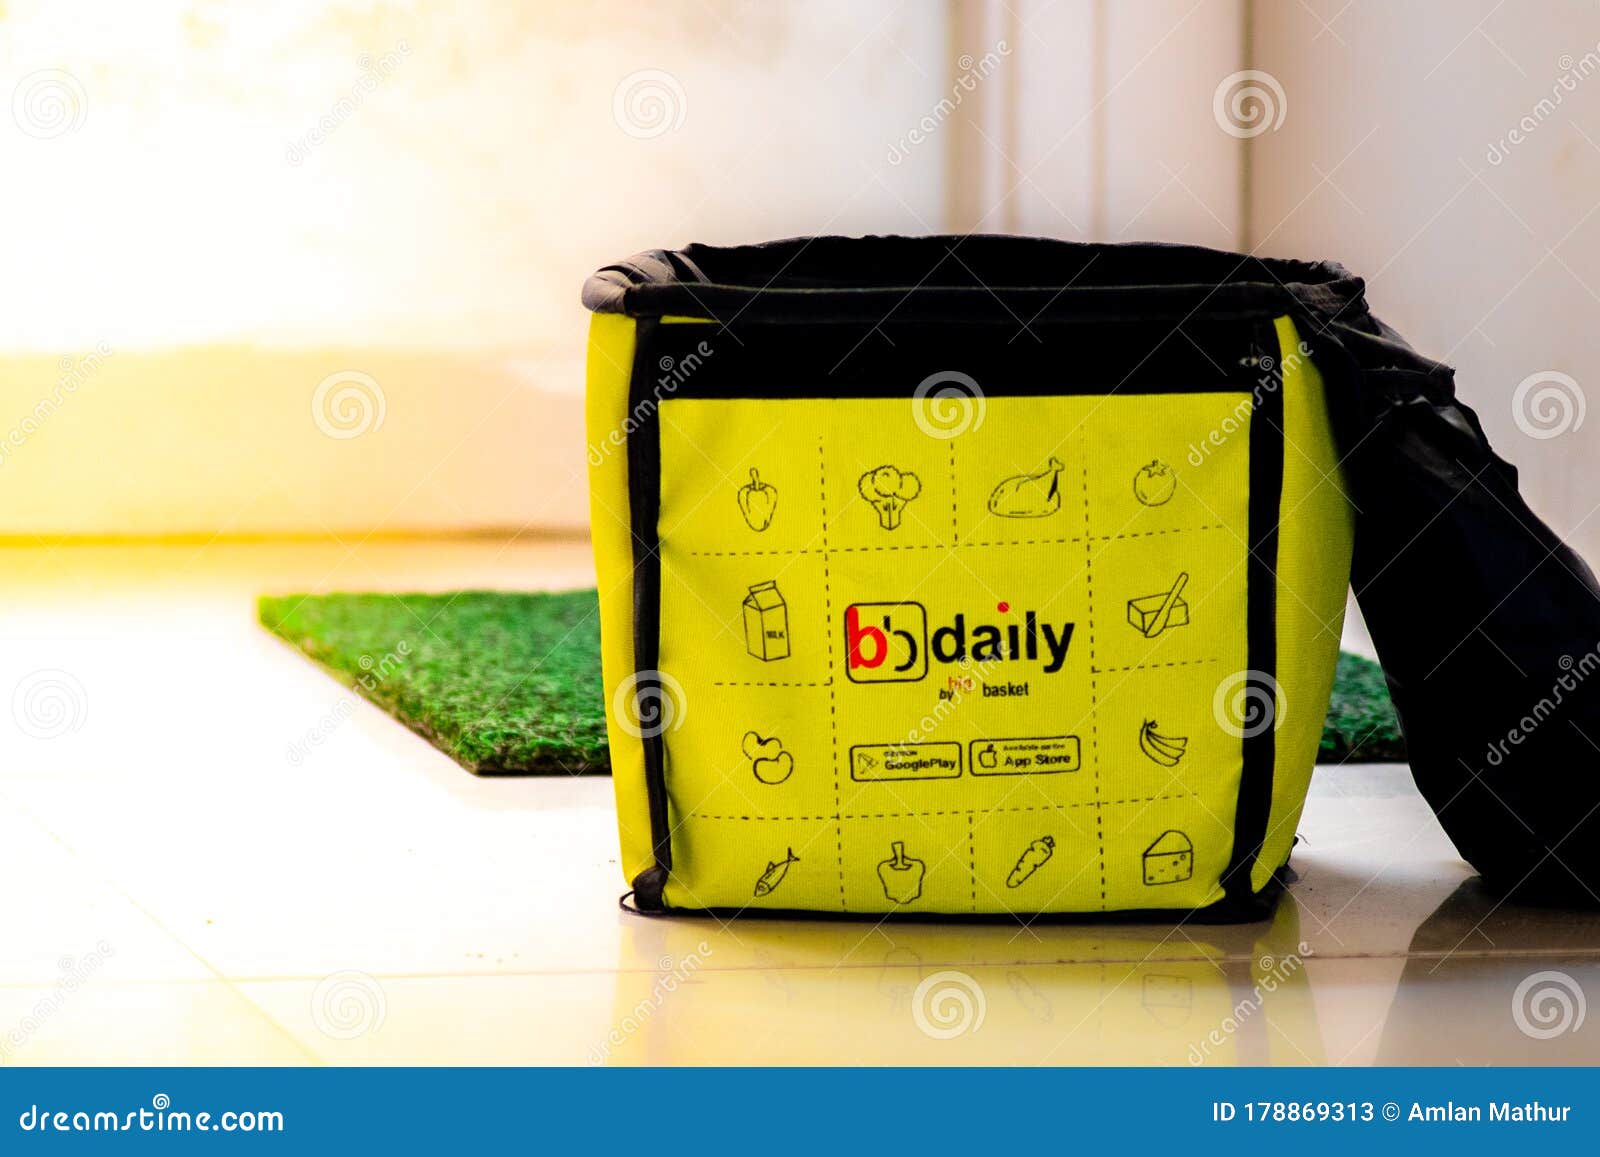 Buy bb Daily Shopping Bag Online at Best Price of Rs 350 - bigbasket